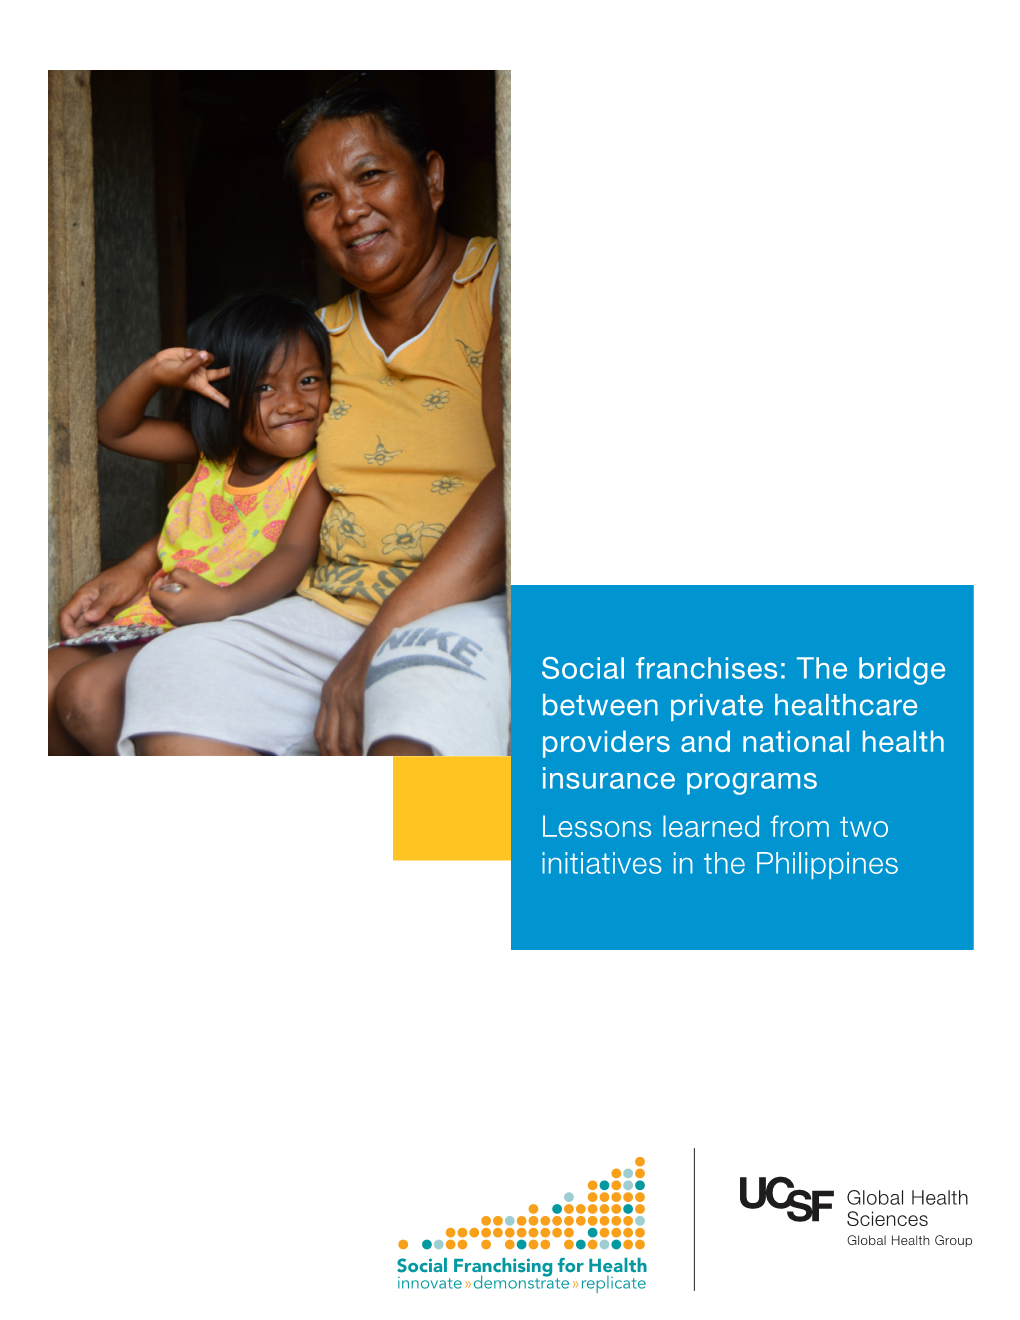 Social Franchises: the Bridge Between Private Healthcare Providers and National Health Insurance Programs Lessons Learned from Two Initiatives in the Philippines